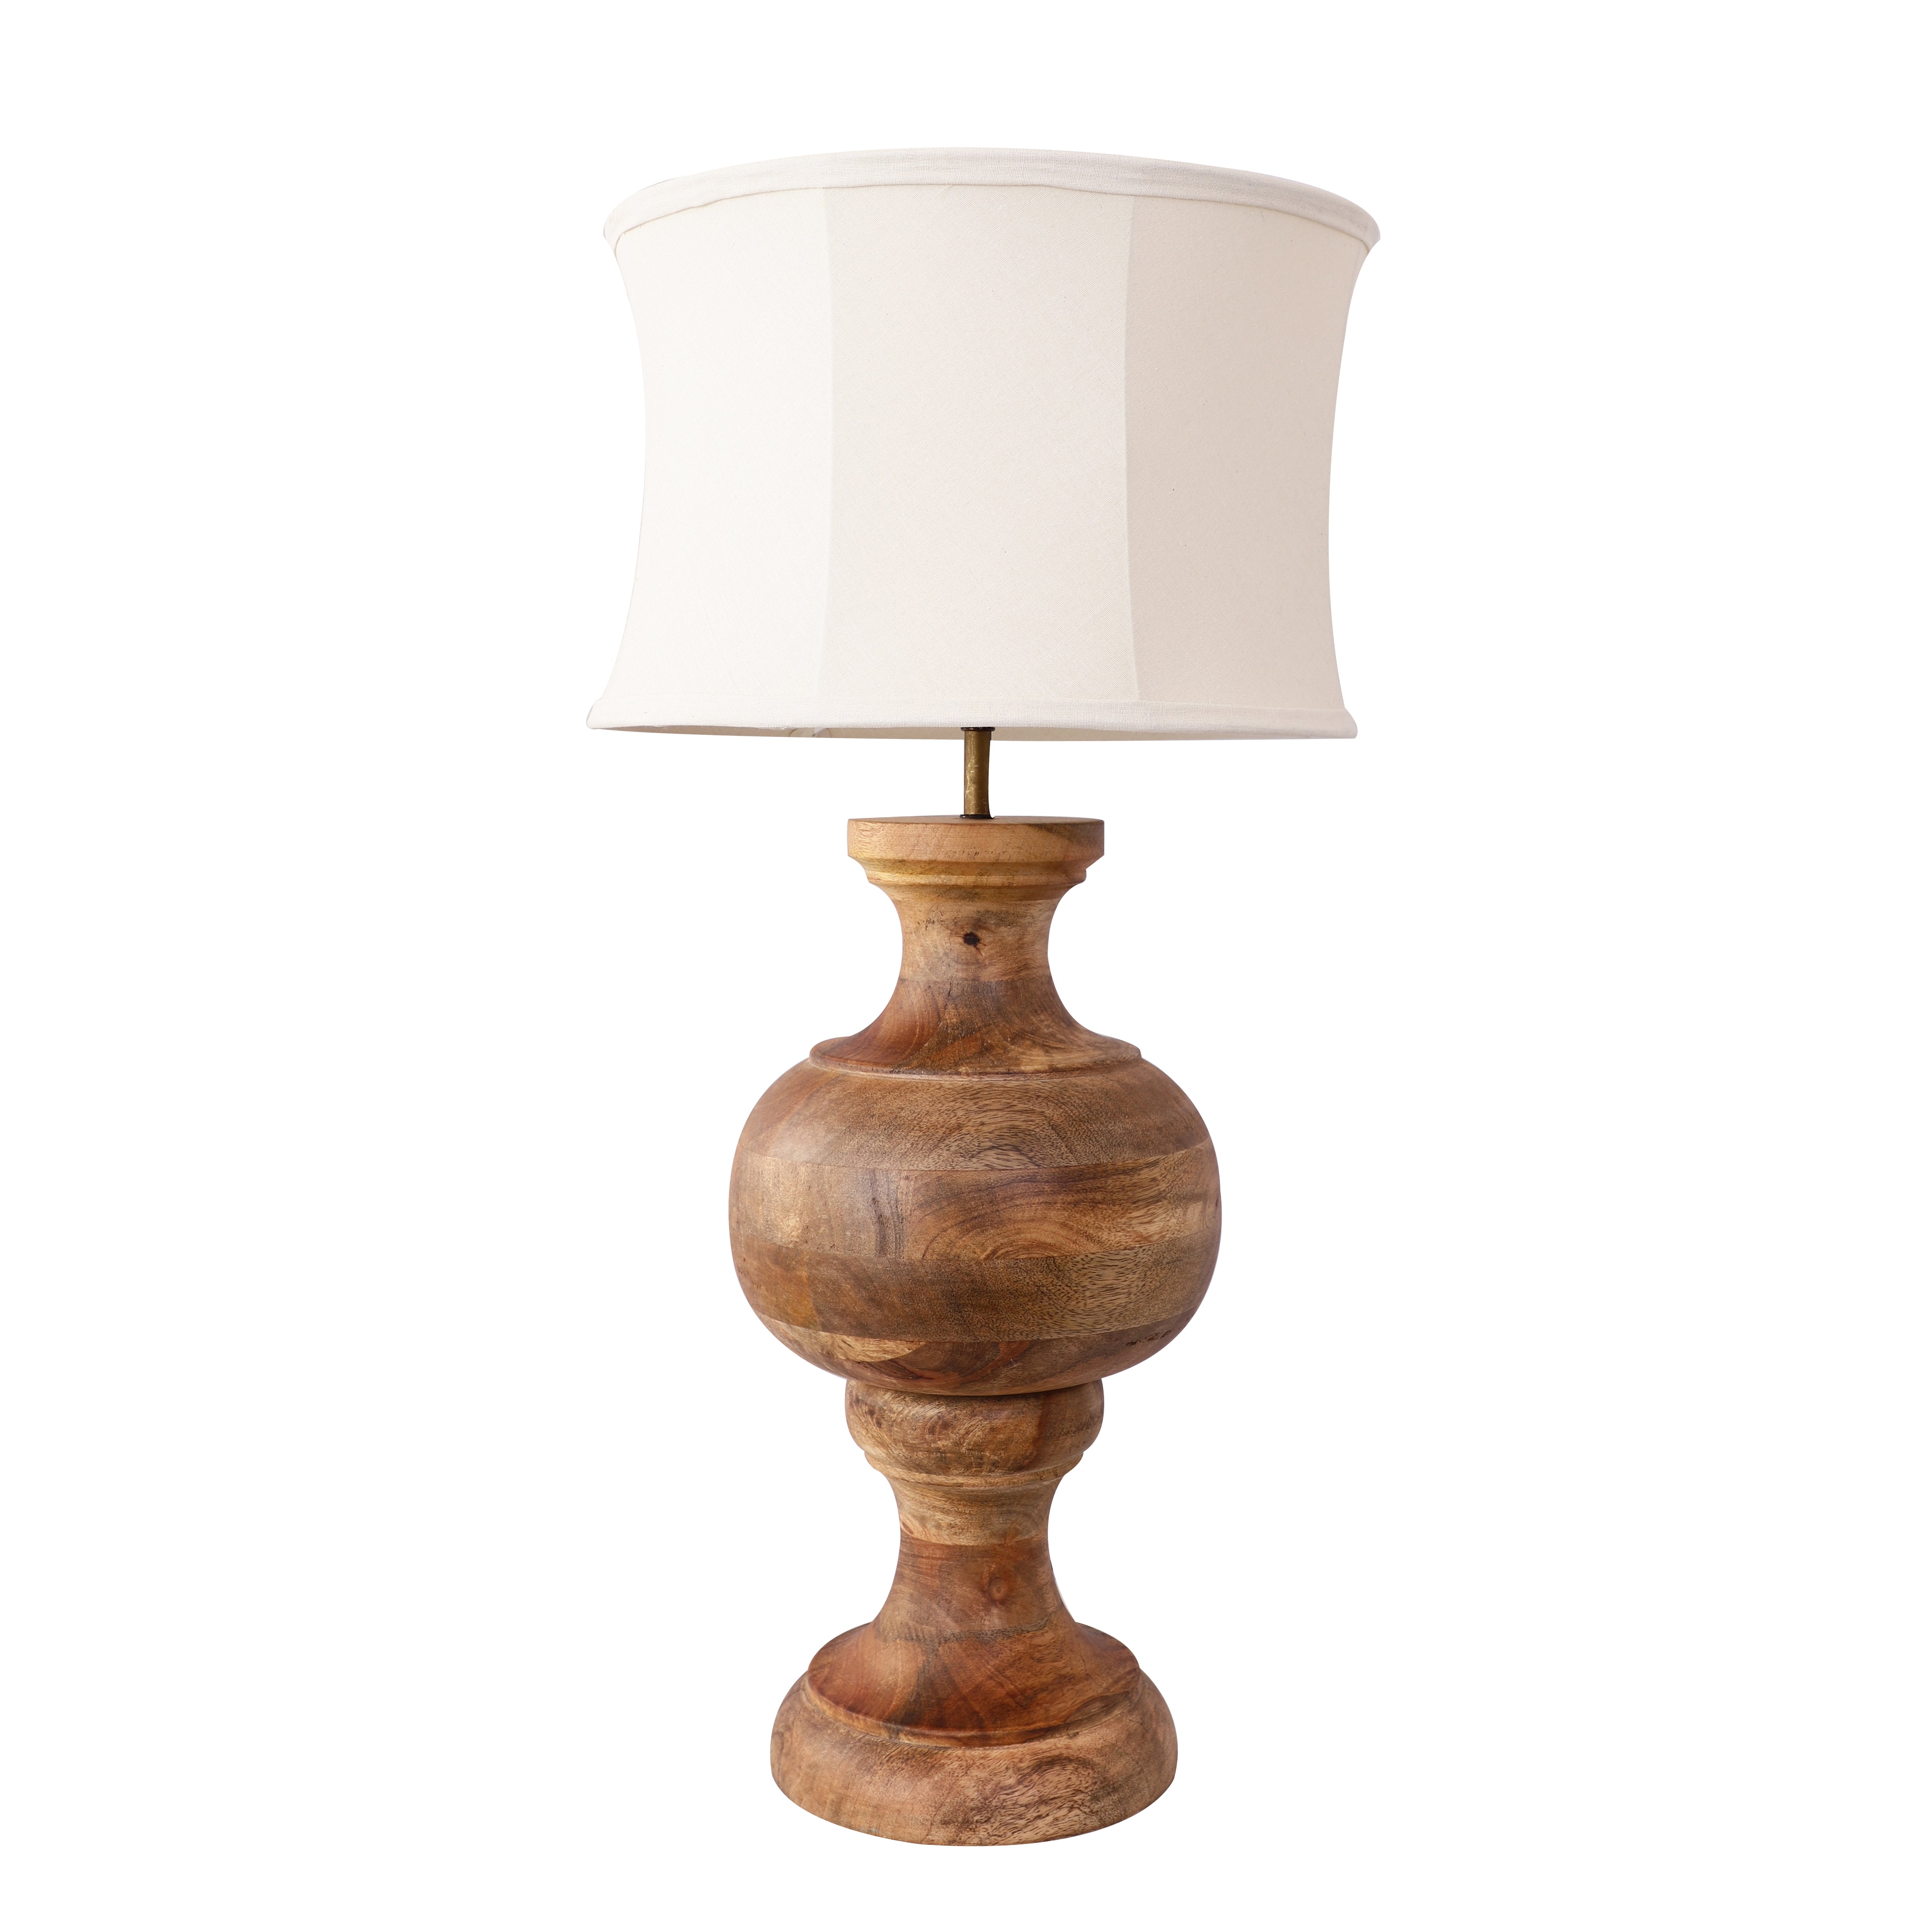 Serendipity Table Lamp